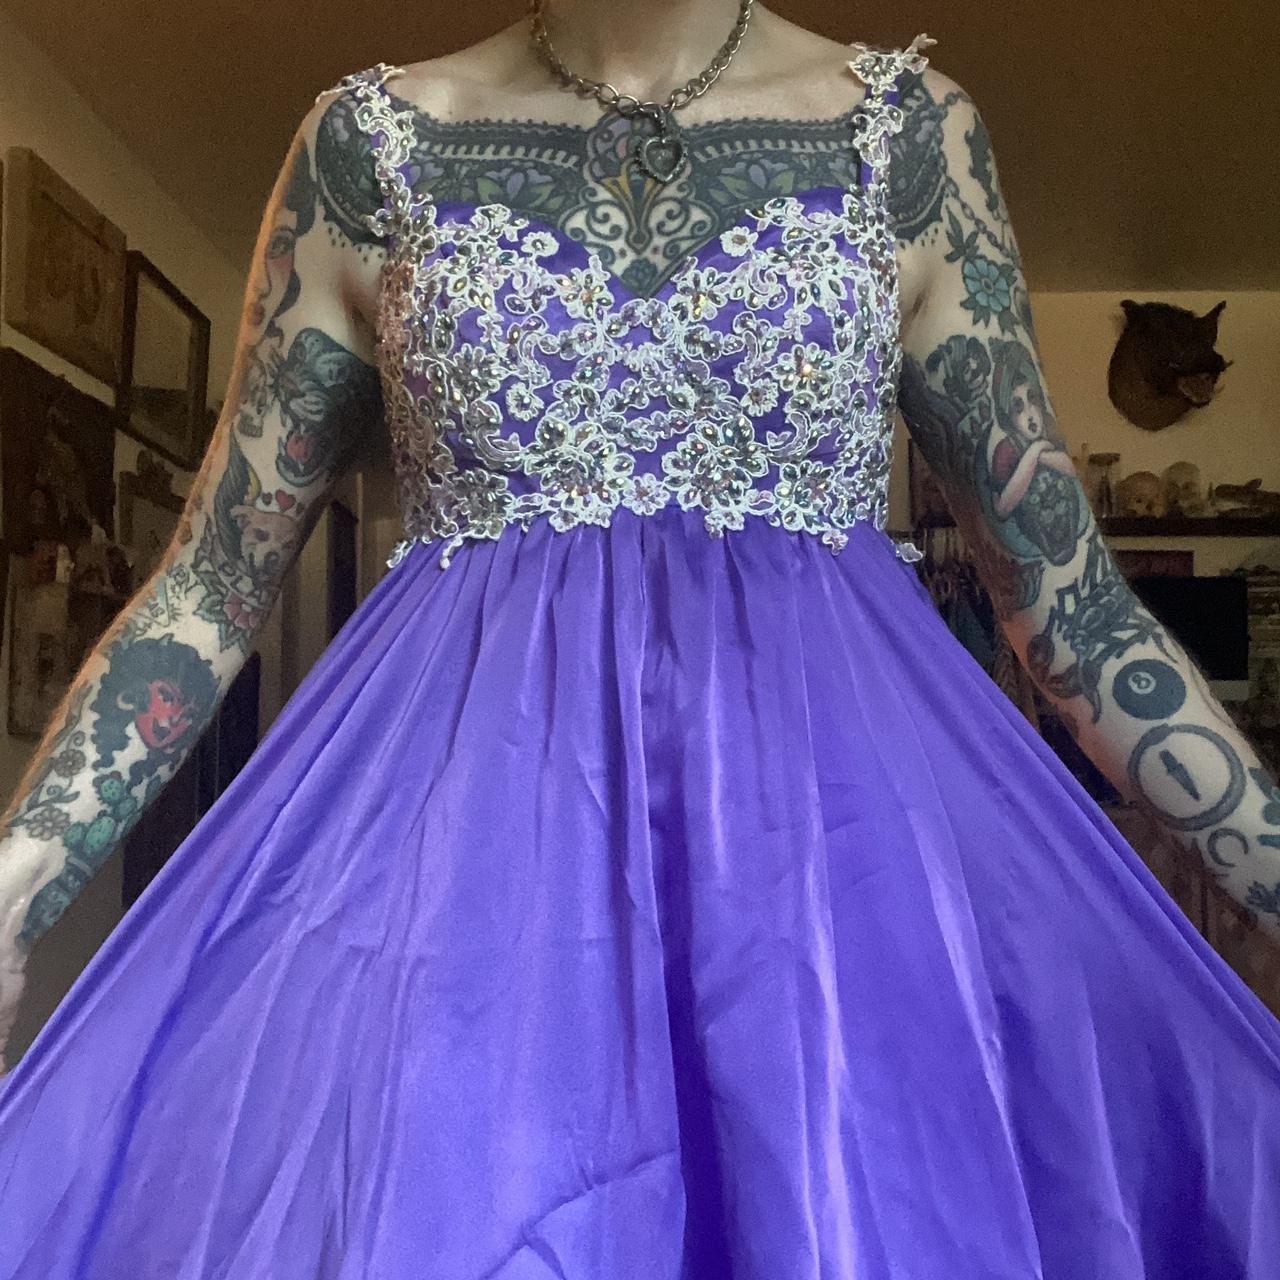 Floral Empire Waist Dress with built in padded bra - Depop